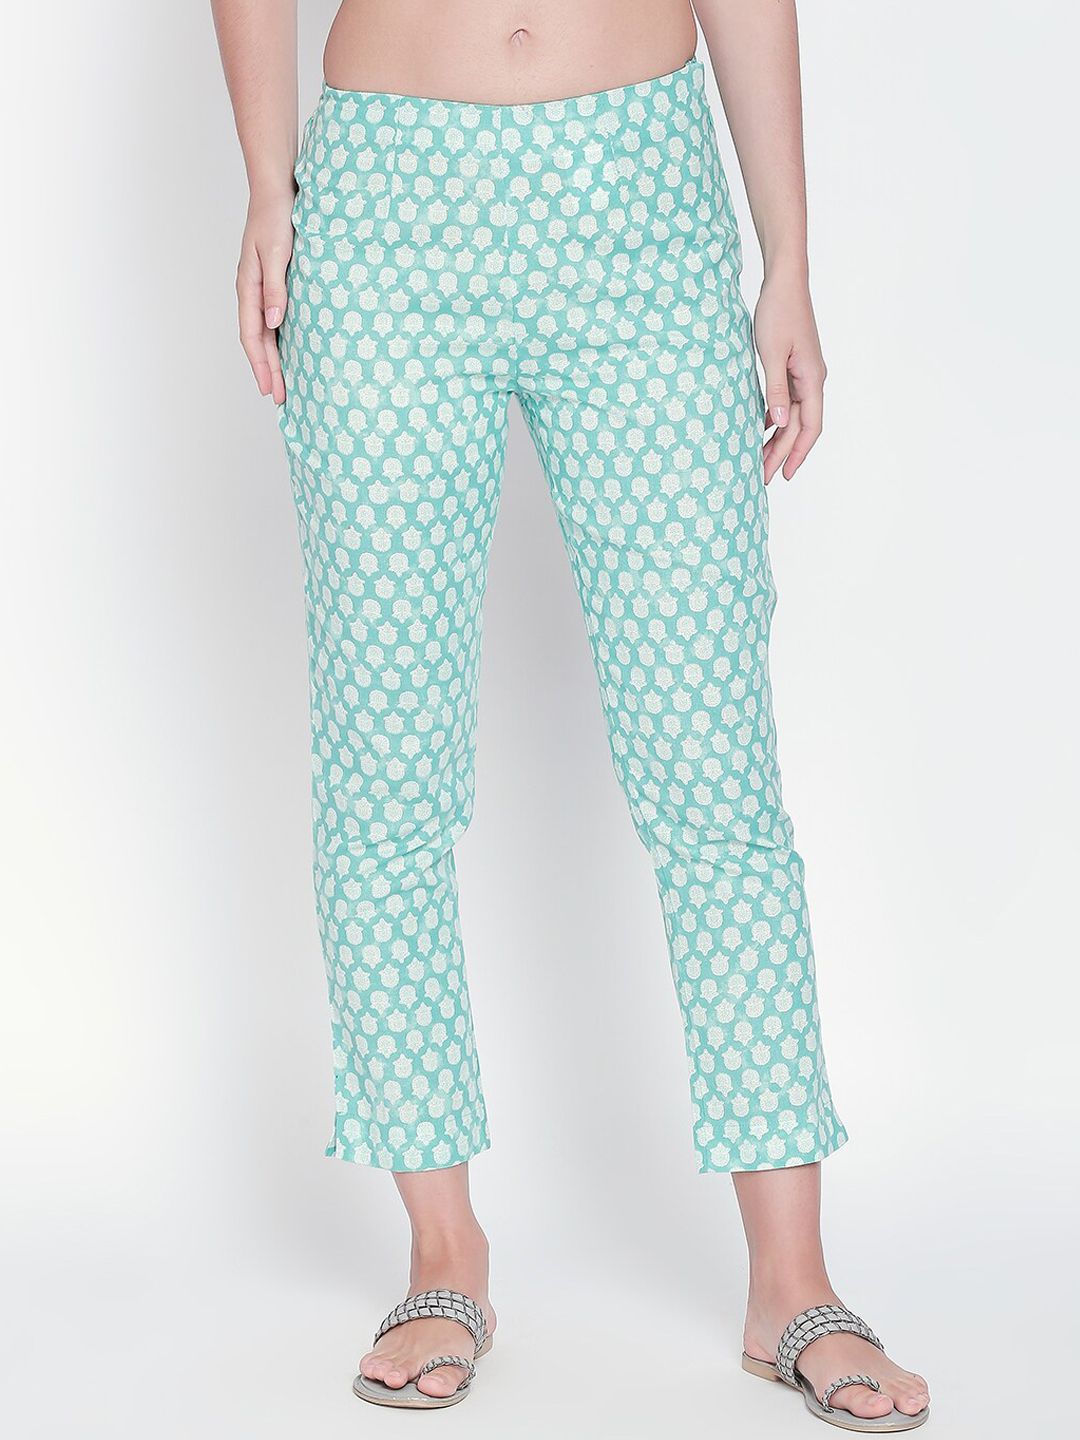 RANGMANCH BY PANTALOONS Women Sea Green Slim Fit Printed Cigarette Trousers Price in India